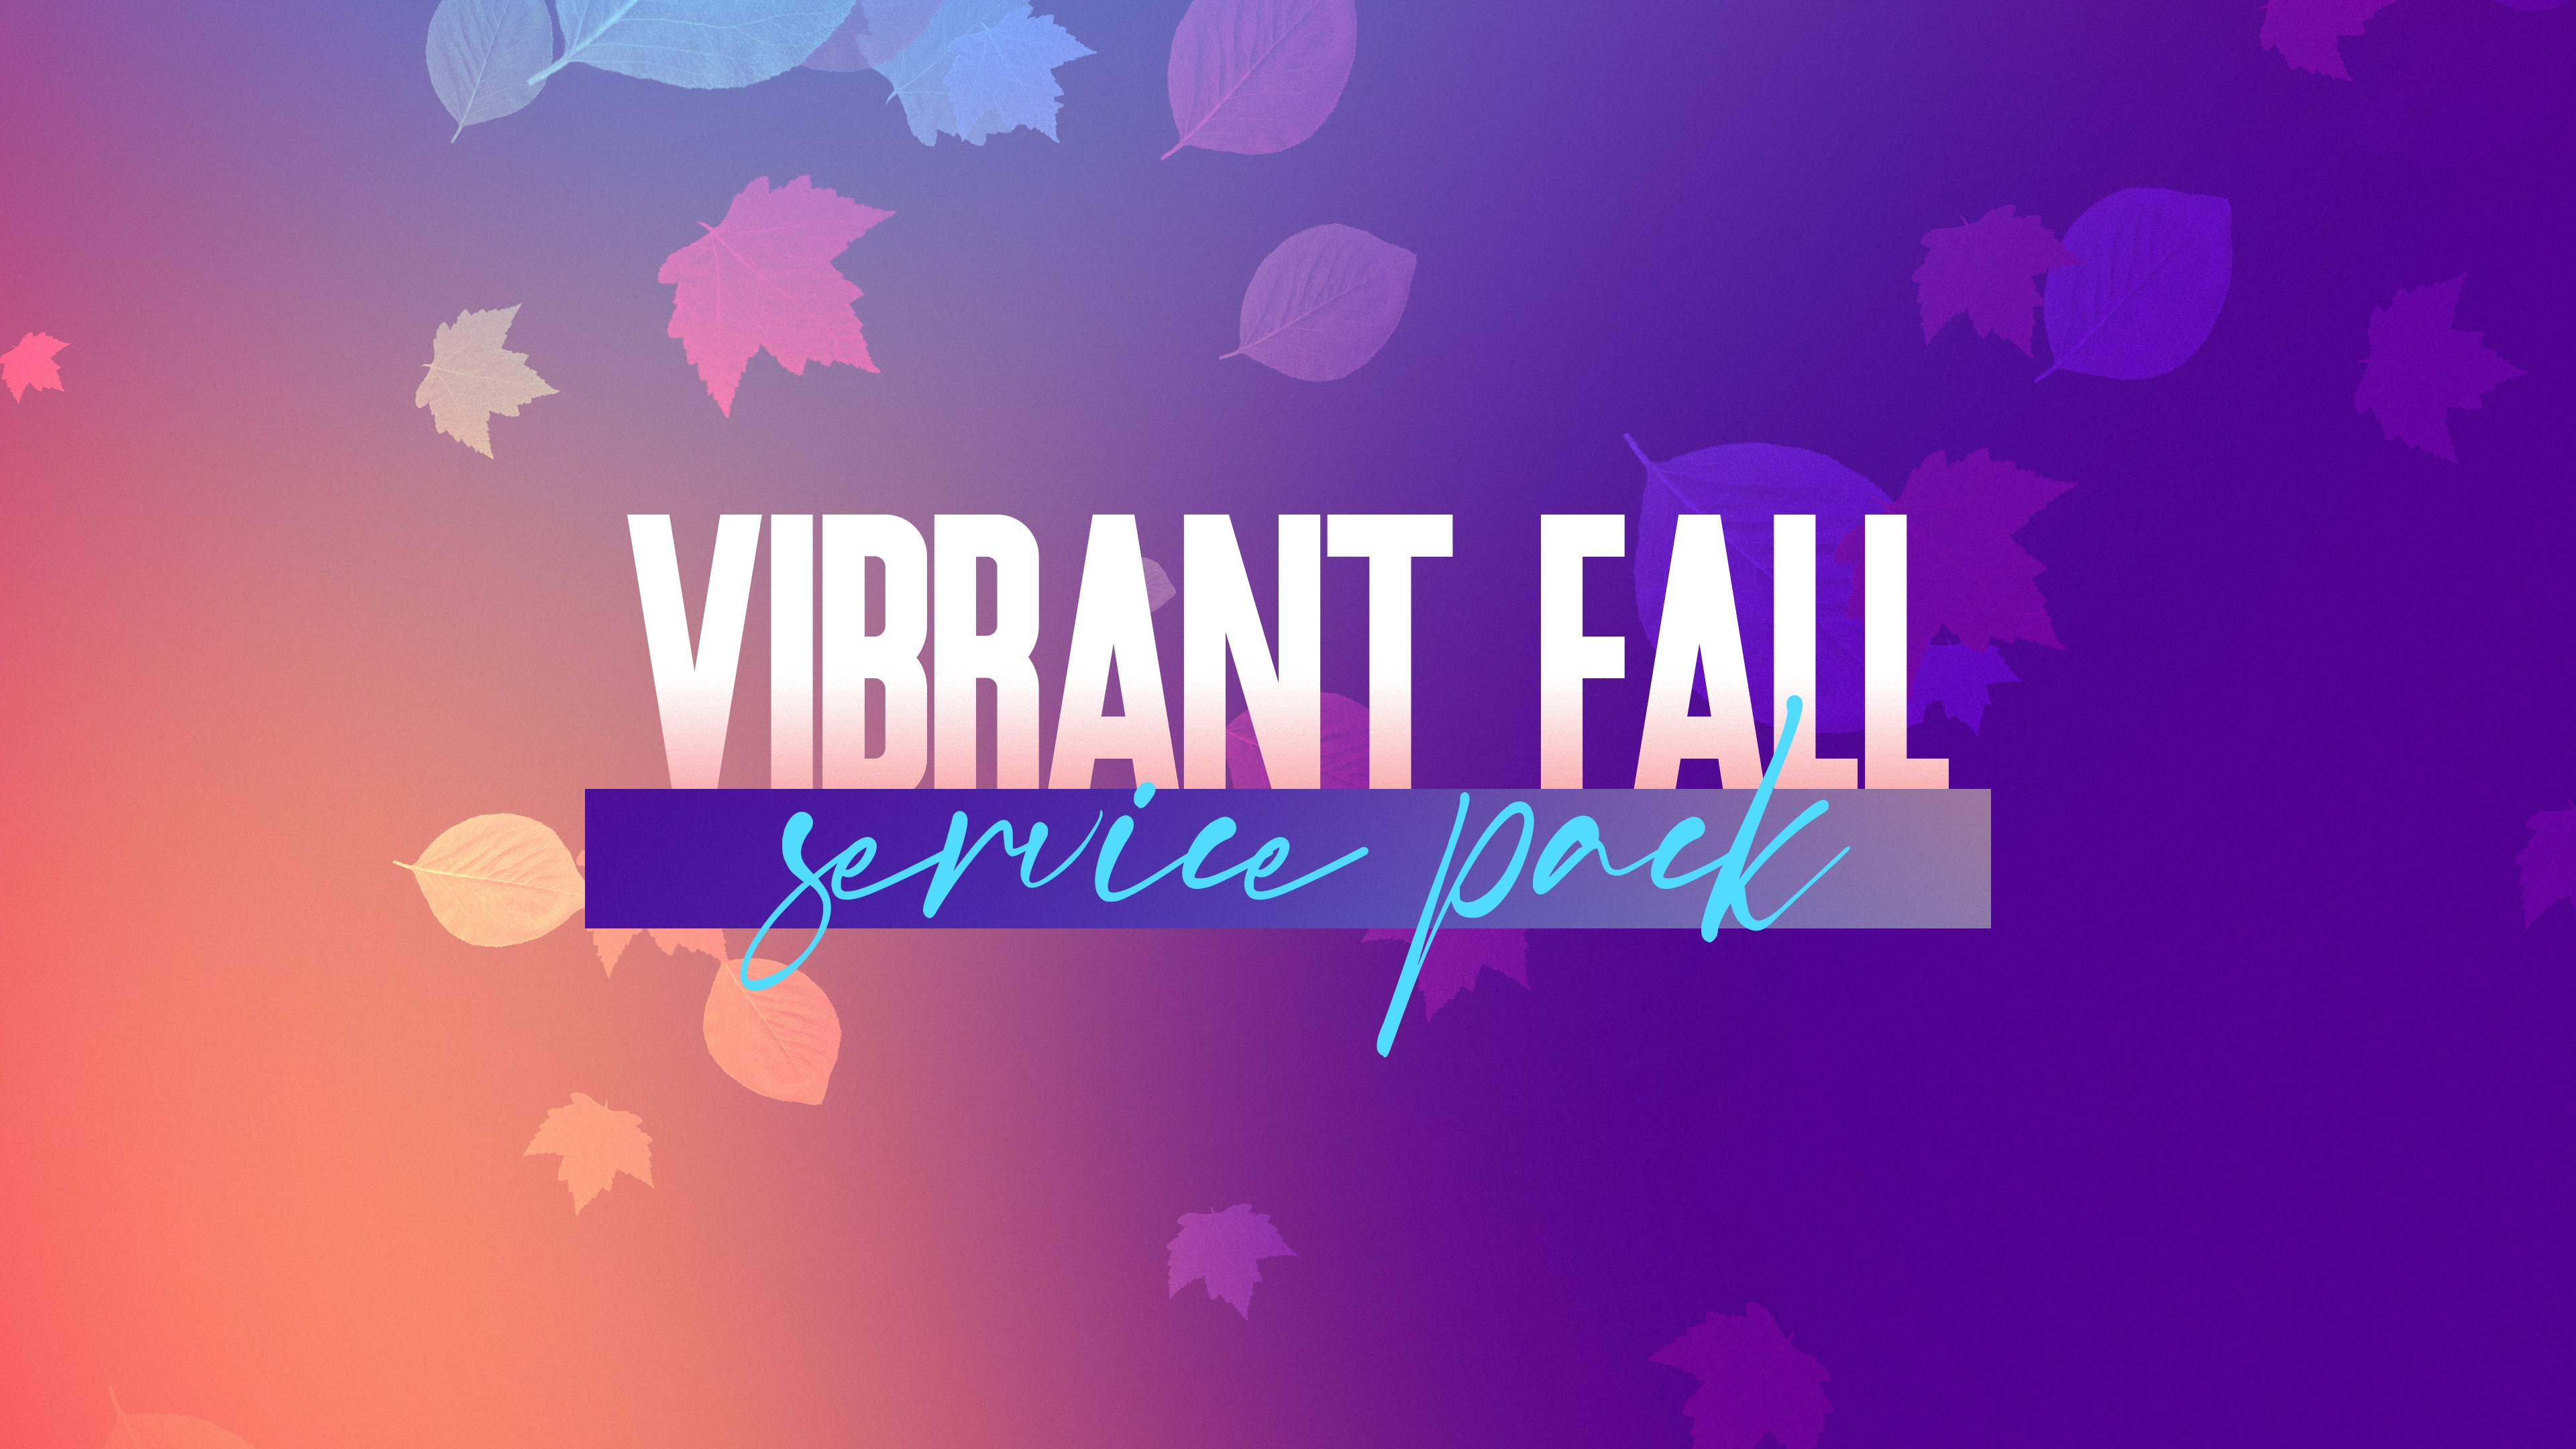 Vibrant Fall Service Pack